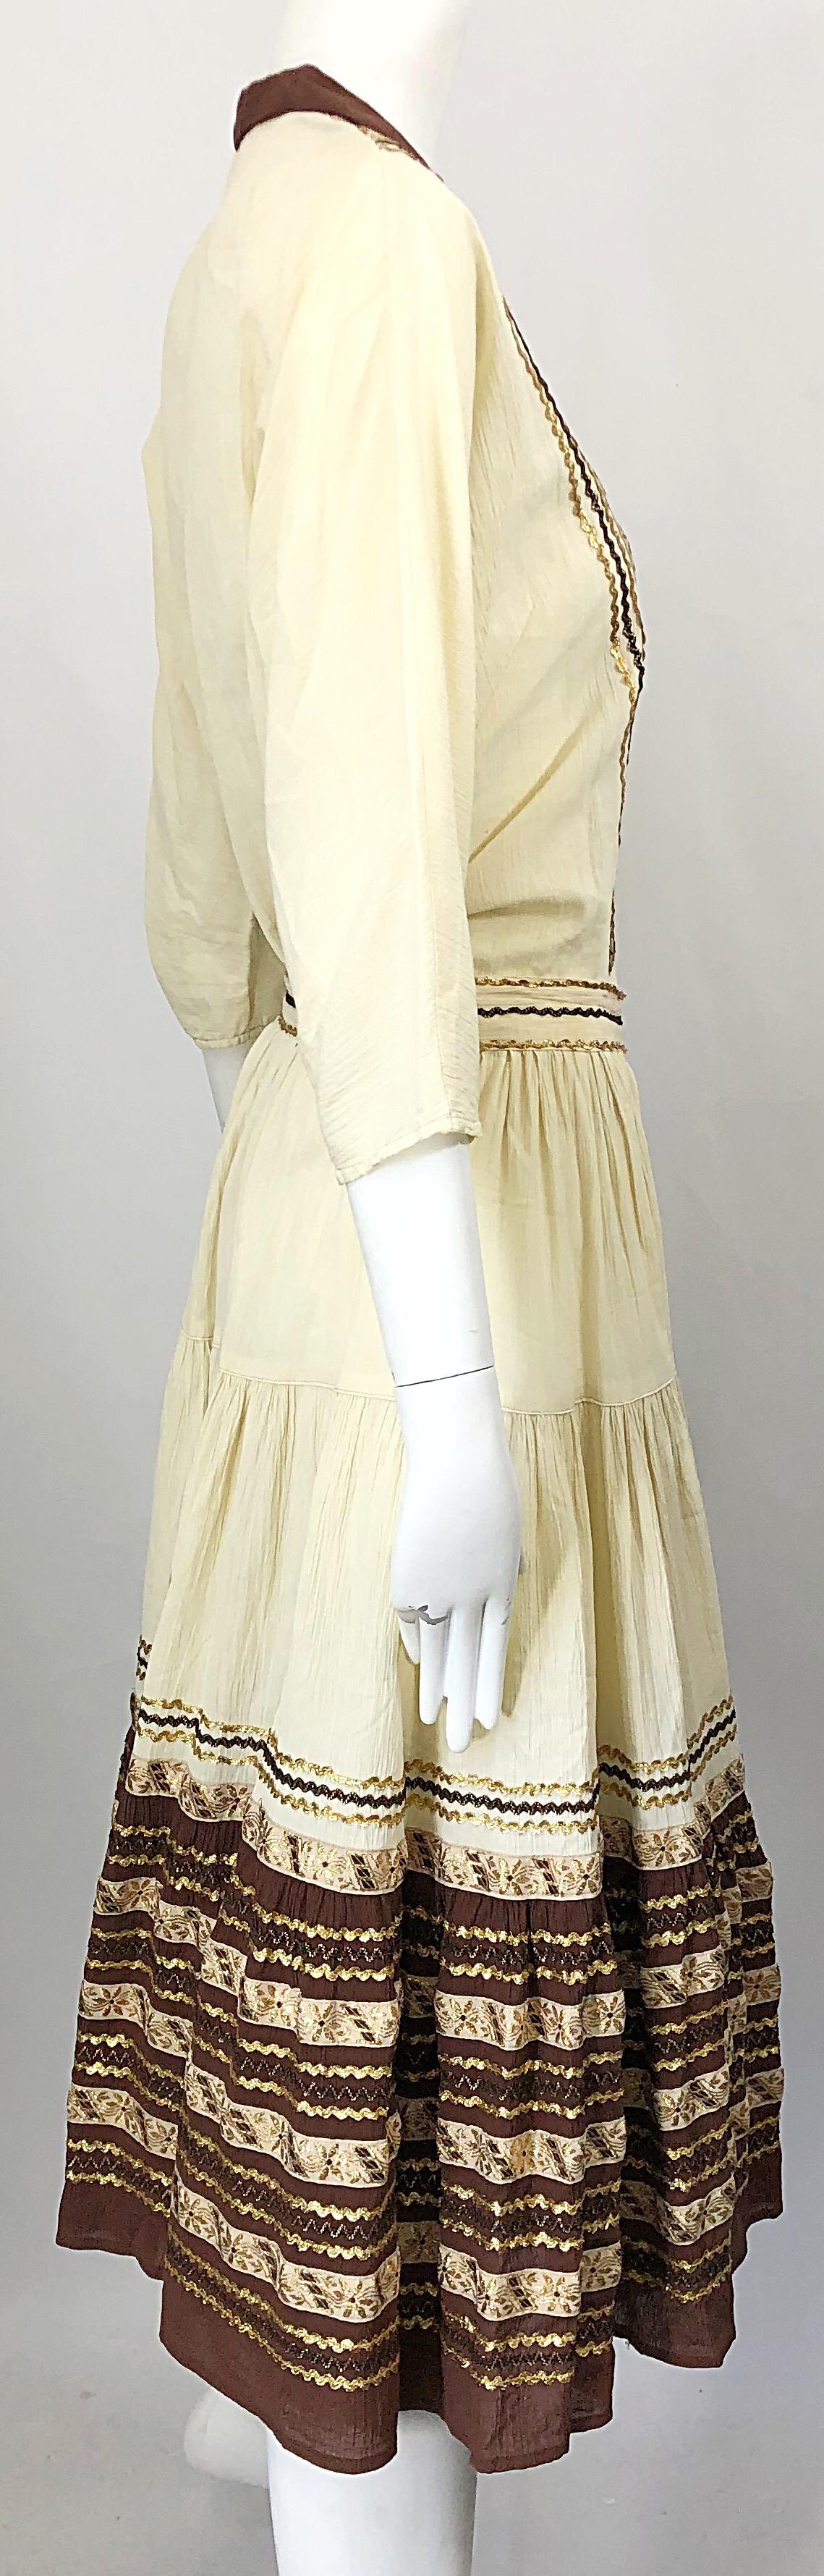 1950s Ivory Brown and Gold Embroidered Silk Tunic Skirt Vintage 50s Patio Dress For Sale 4